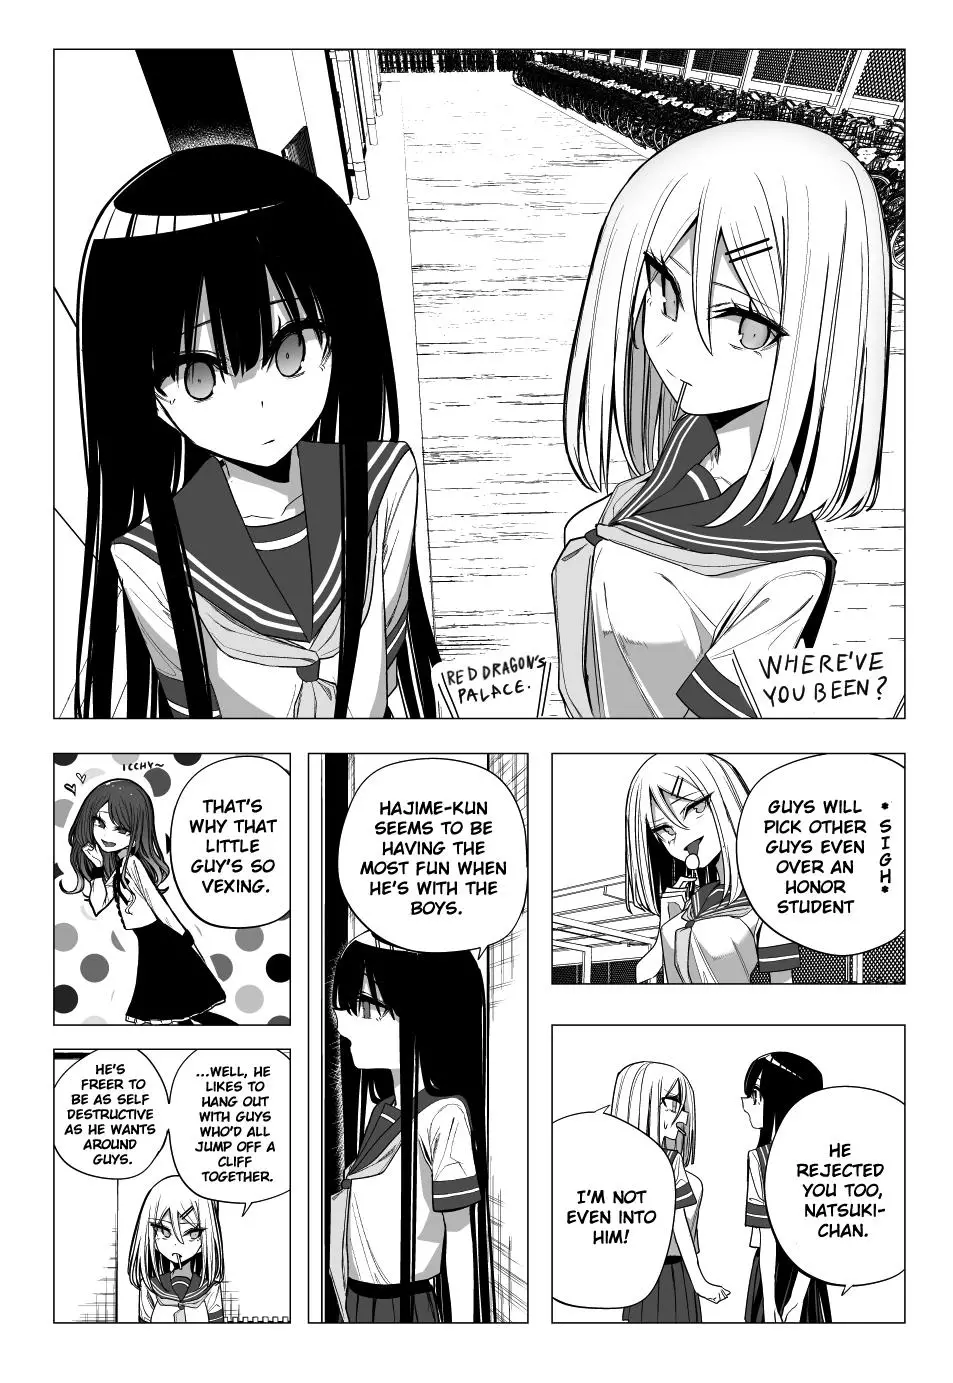 Mitsuishi-San Is Being Weird This Year - 30 page 20-e4802606